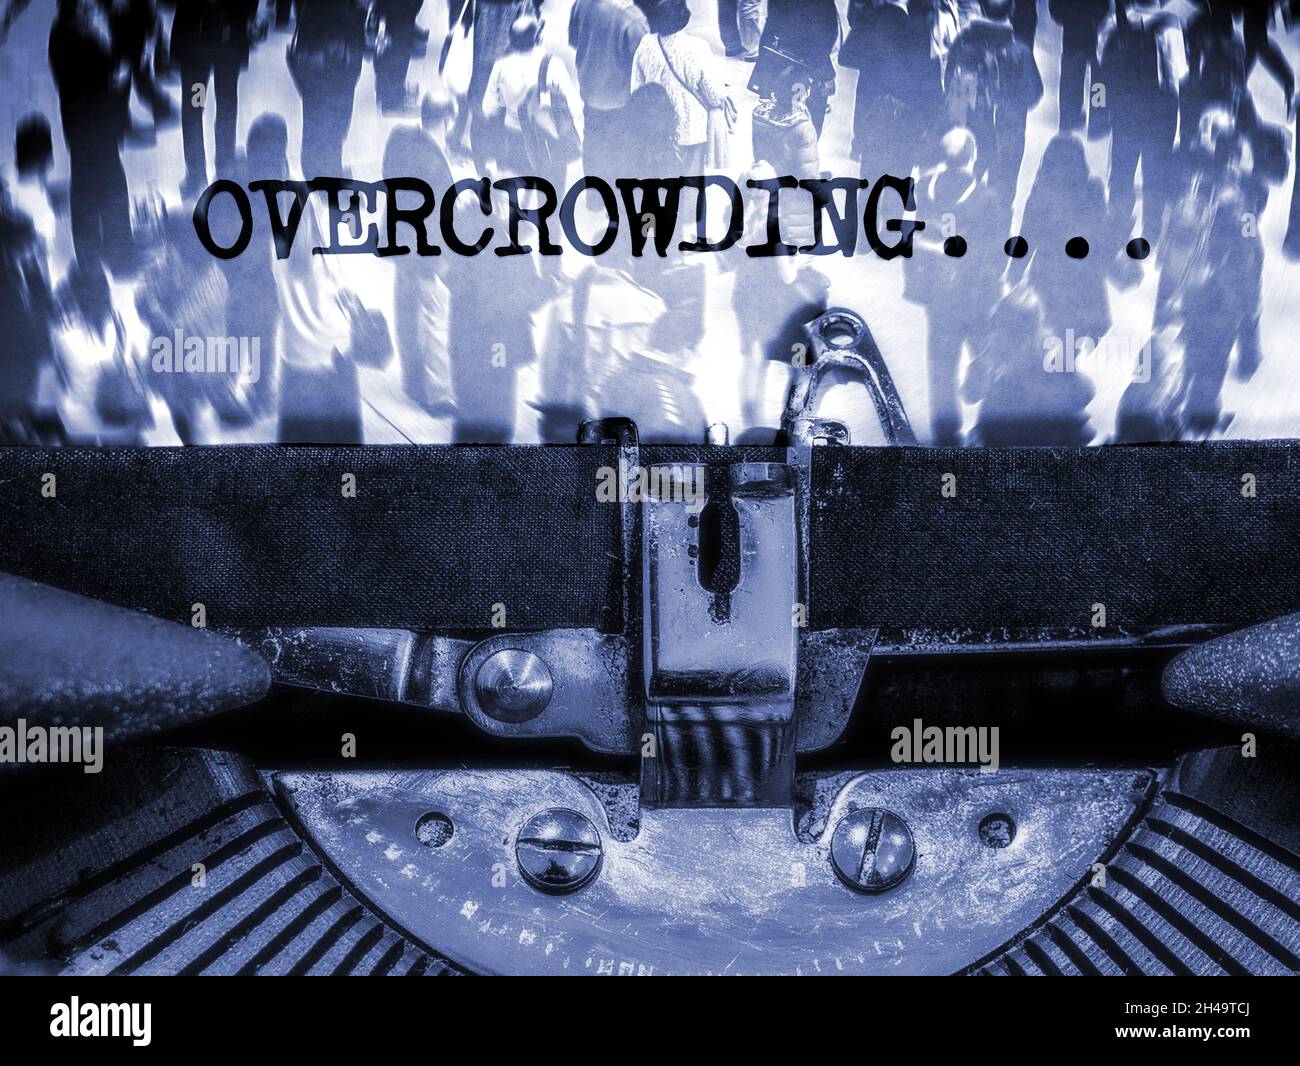 Typewriter displaying the words Overcrowding with a crowd of people in the background in a mono blue tone Stock Photo